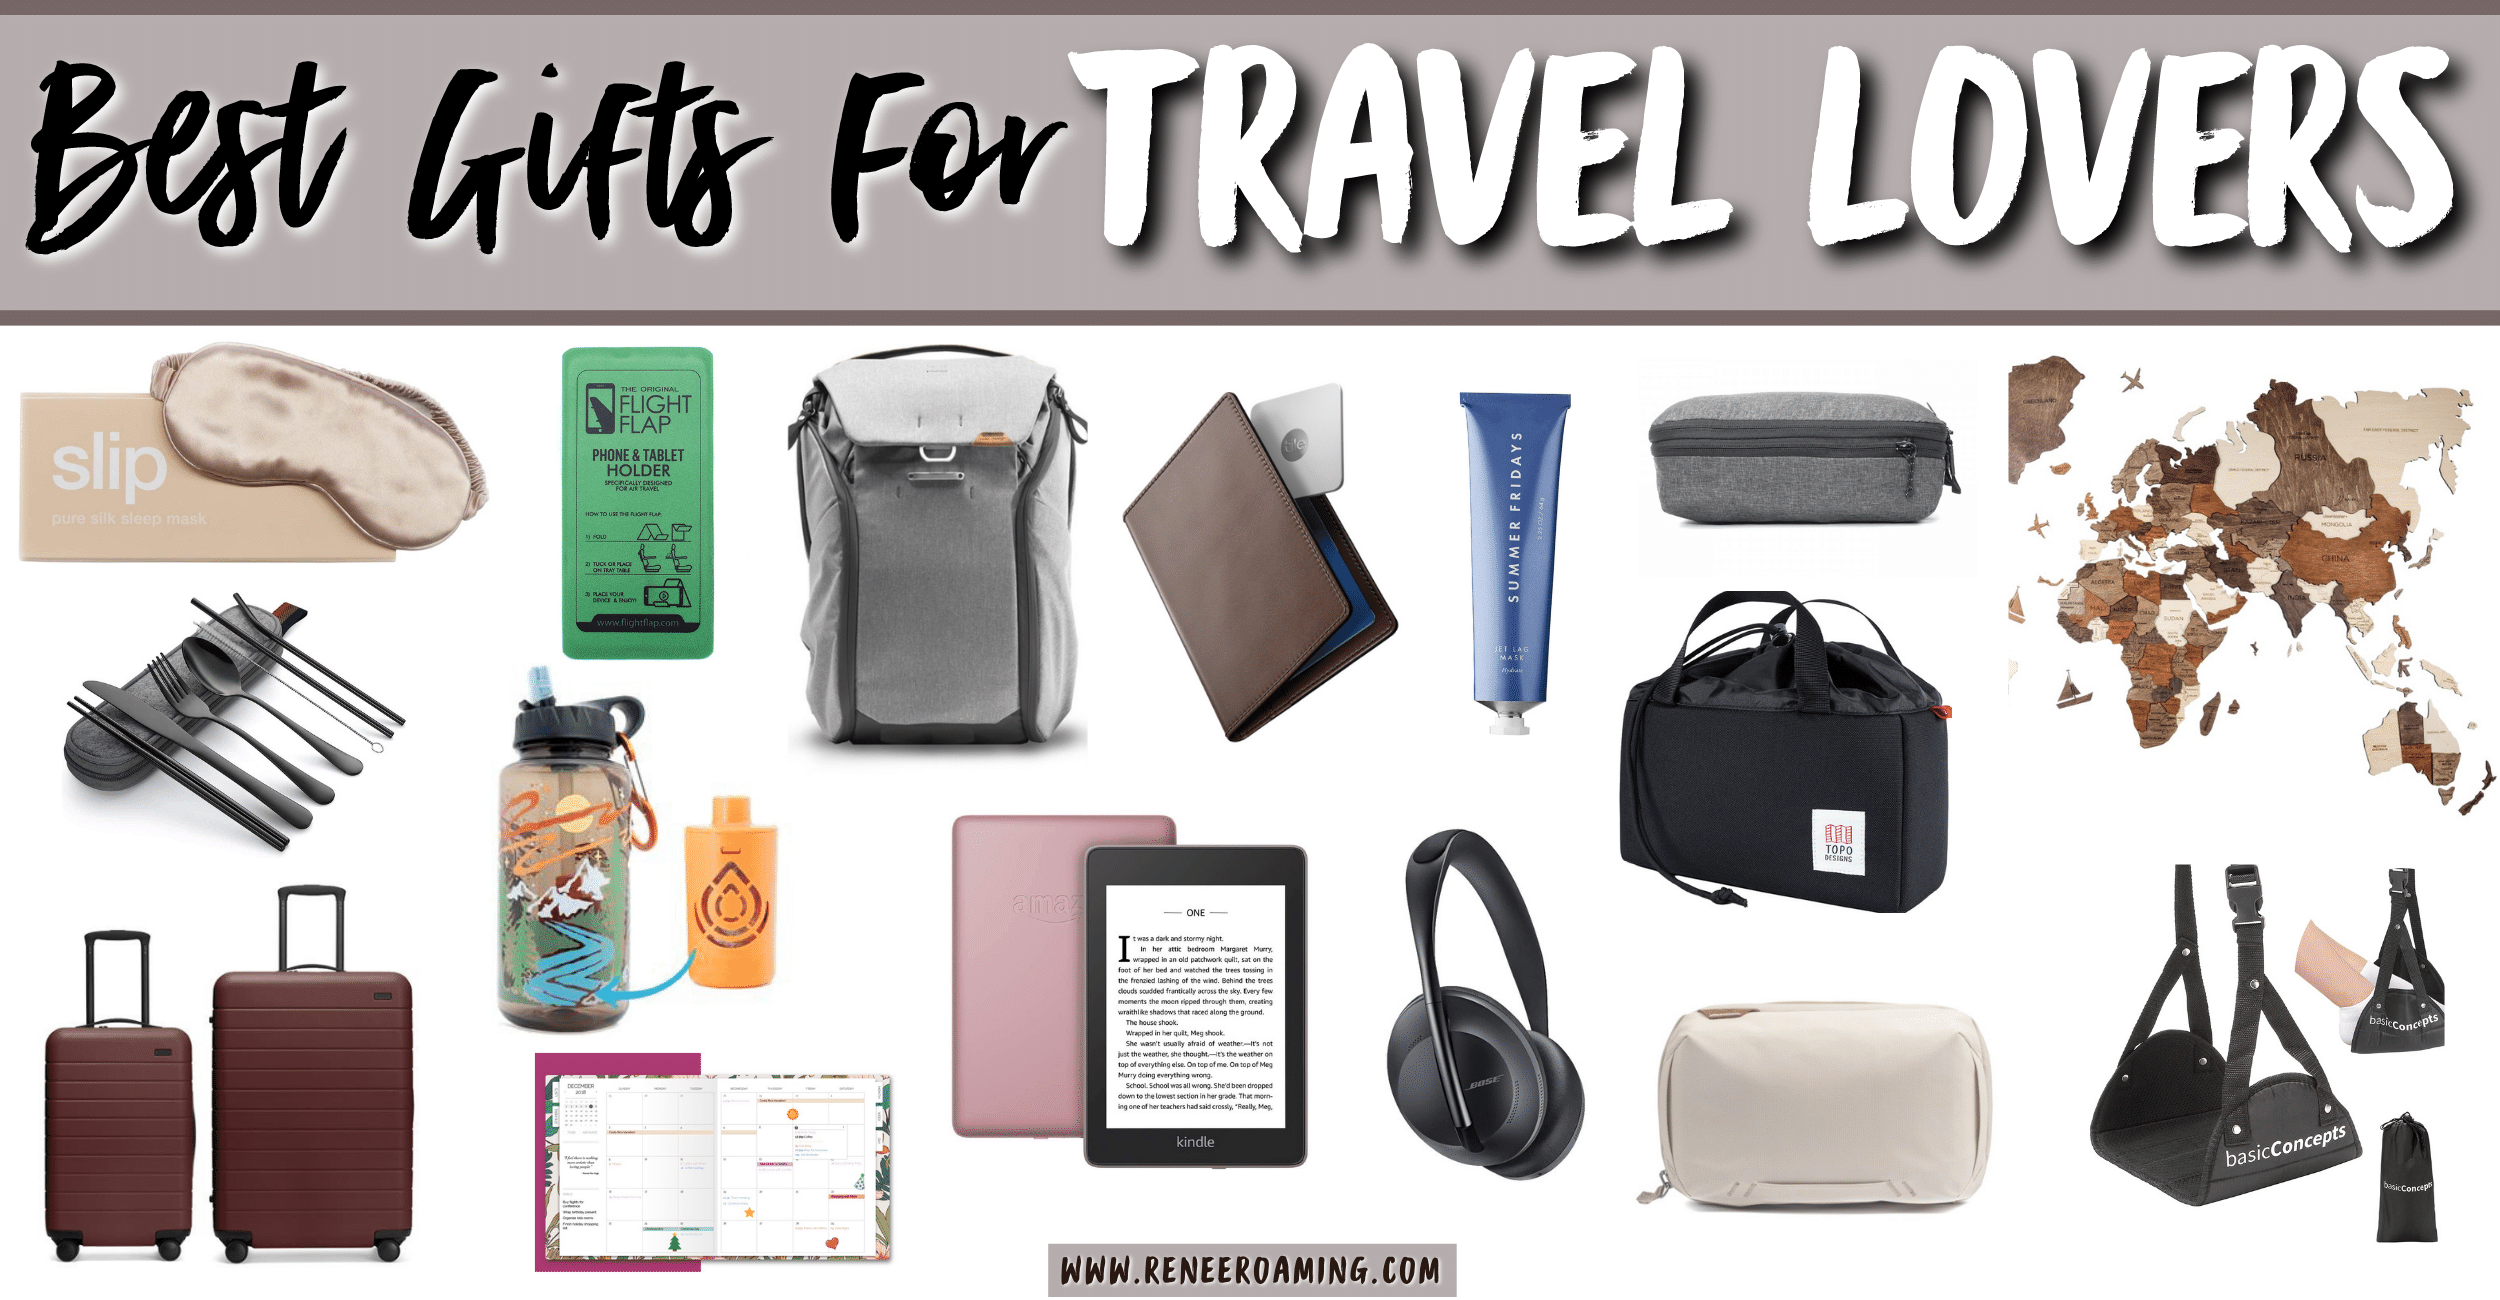 22 Best Gifts for Travel Lovers 2020 - Renee Roaming